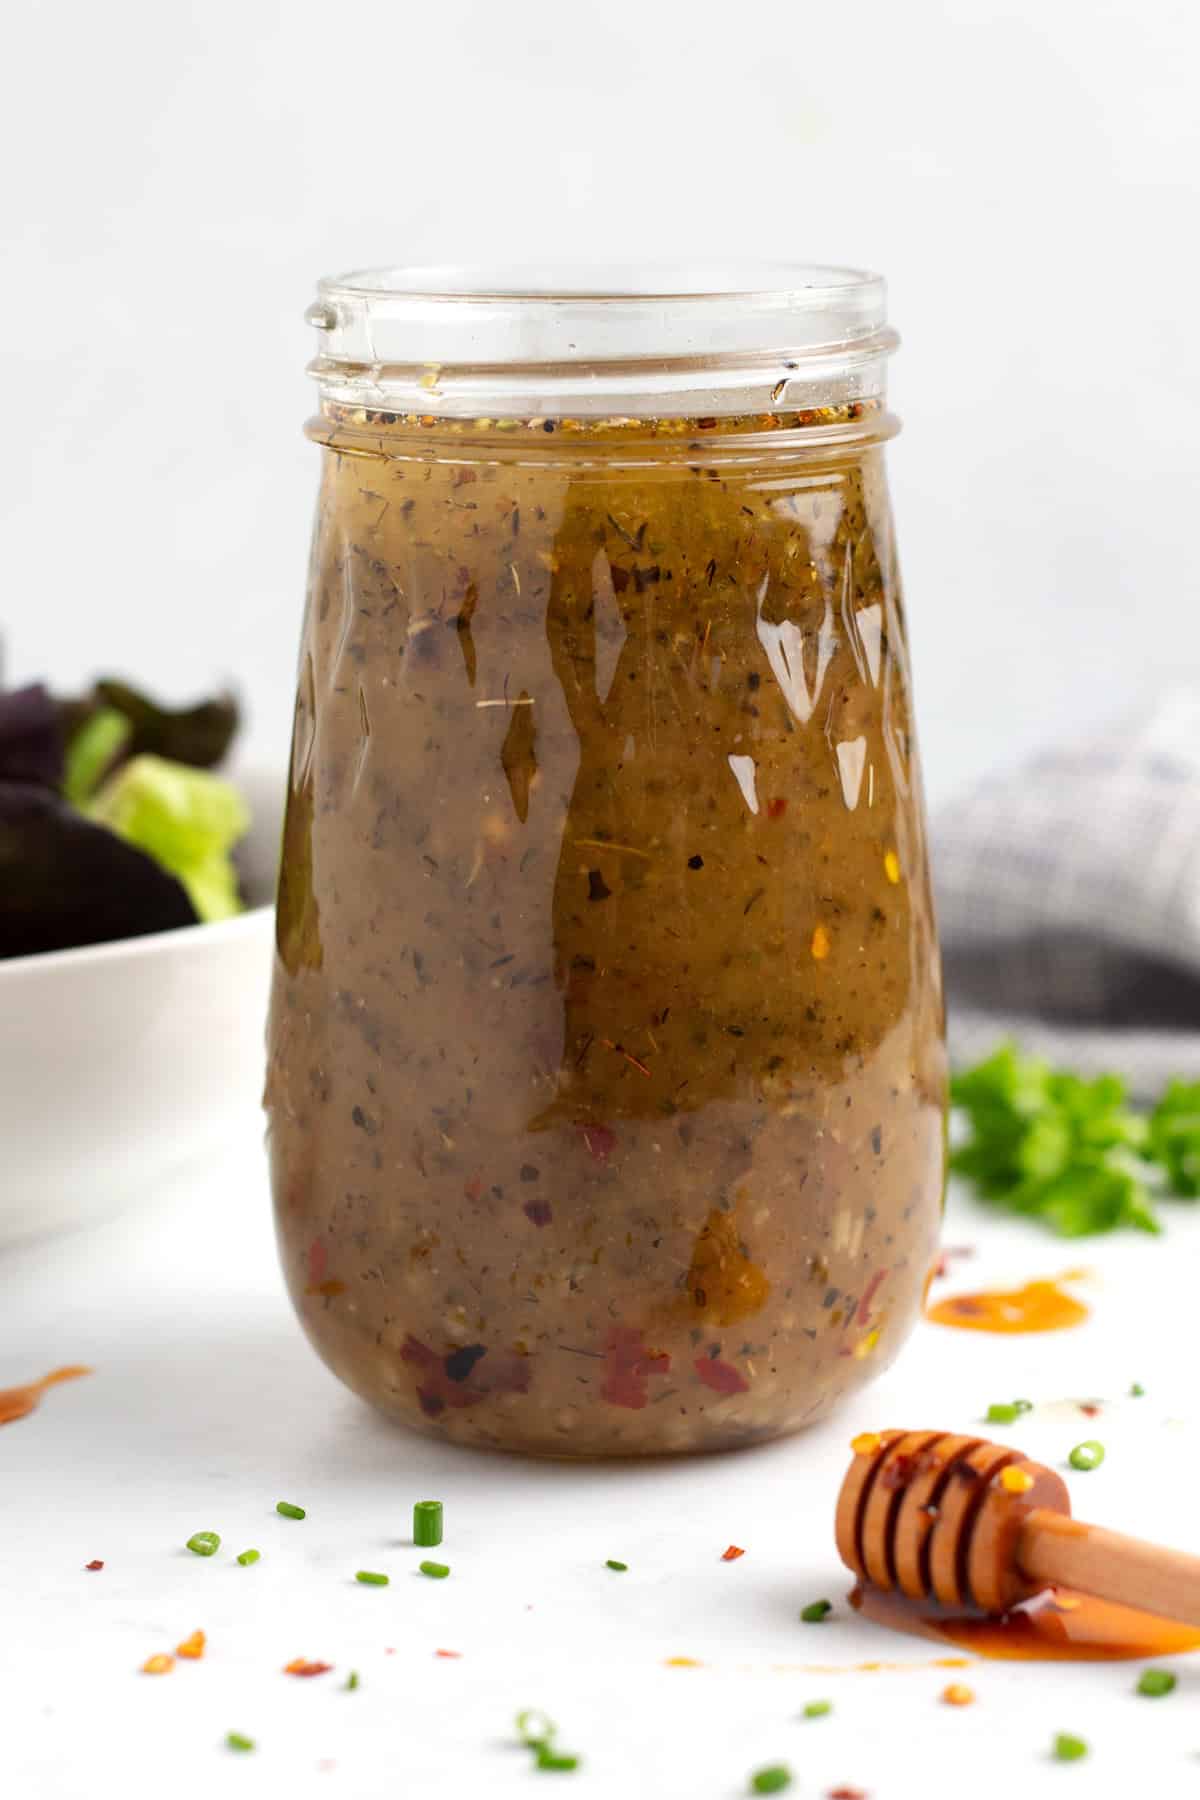 A close up view of a jar of salad dressing with fresh herbs sprinkled around the jar, a honey stick laying in front of the jar, and a bowl of lettuce behind the jar.